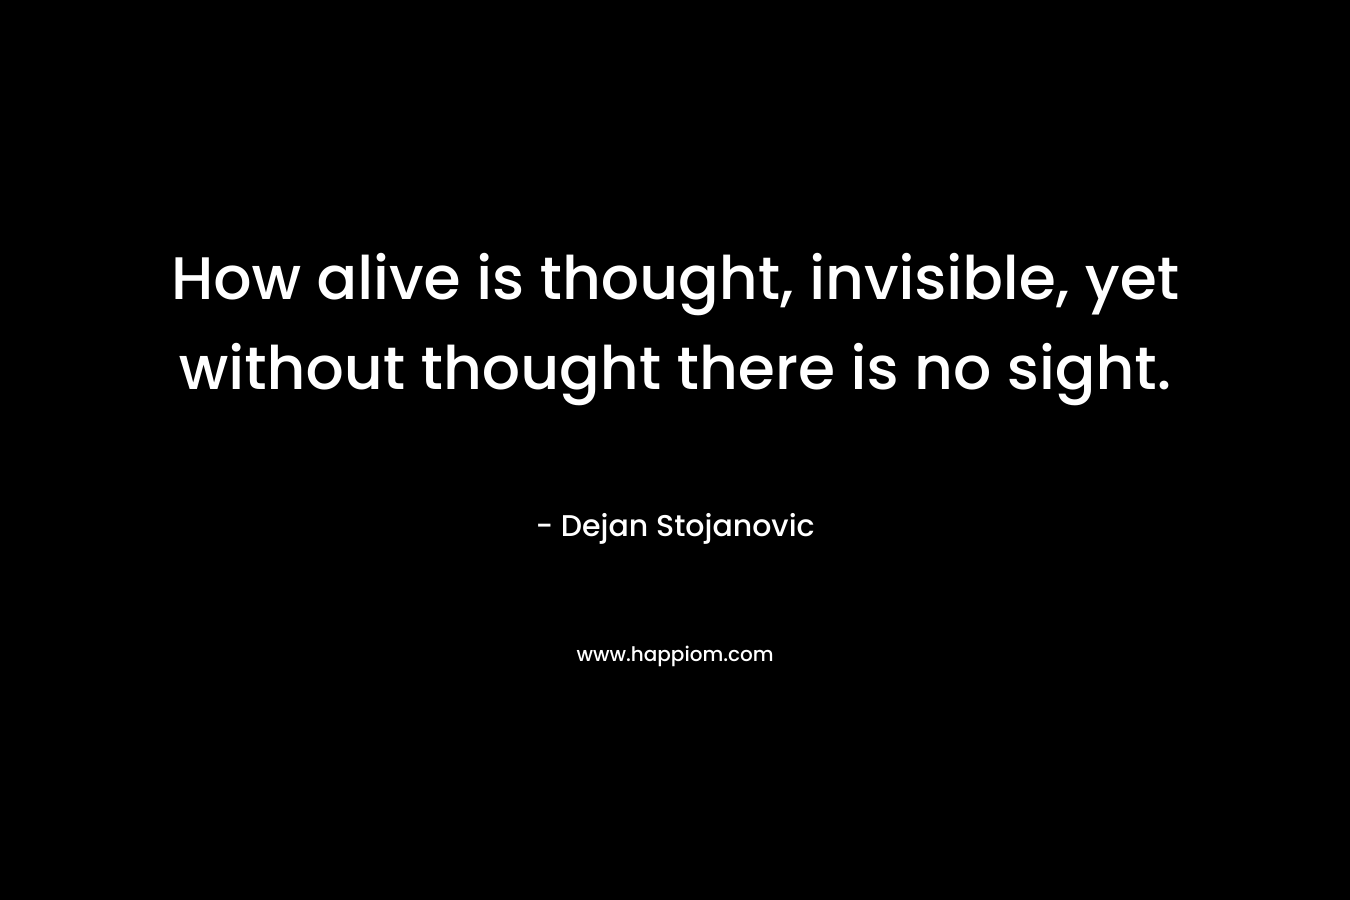 How alive is thought, invisible, yet without thought there is no sight.